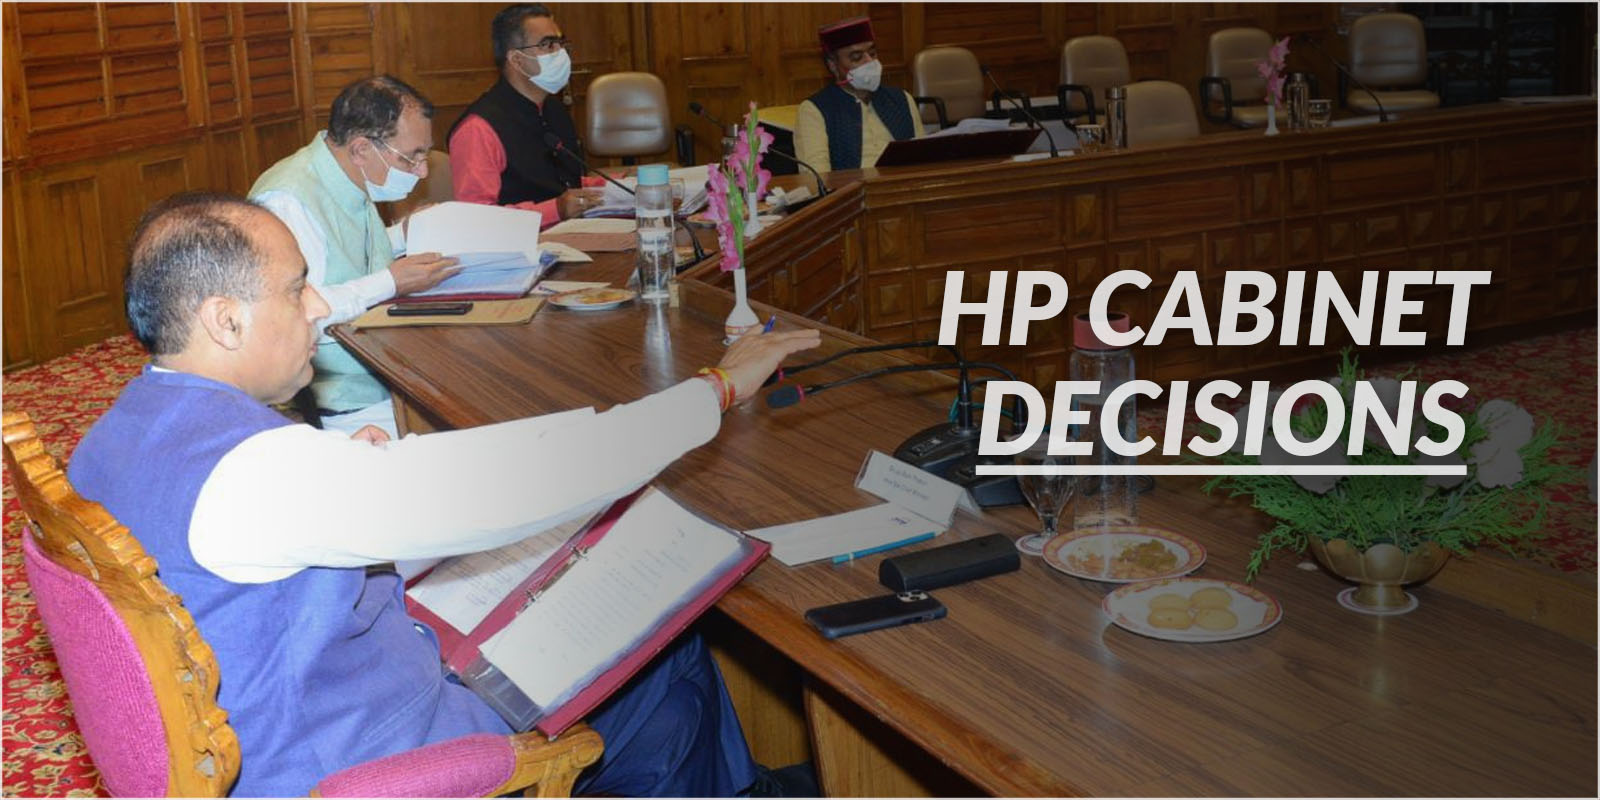 hp cabinet decisions july 7, 2021